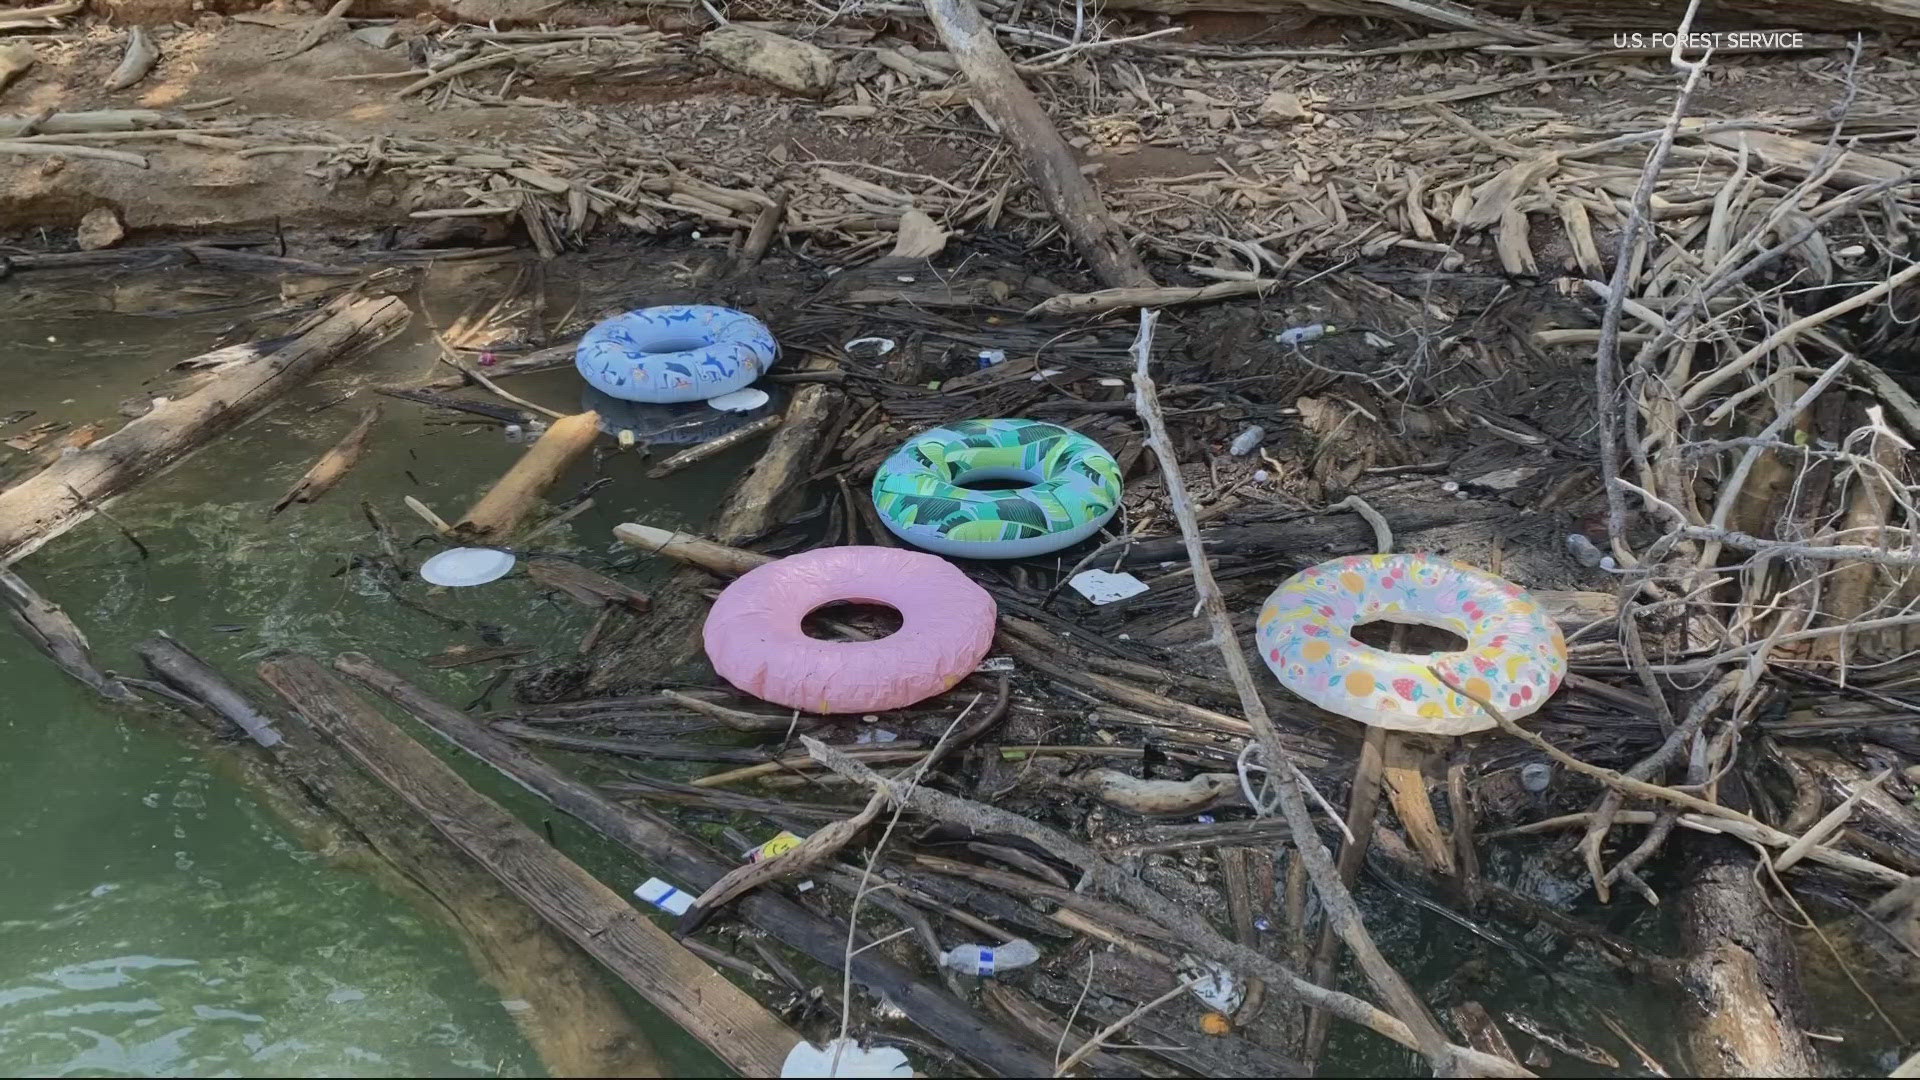 The university put out a statement, thanking the U.S. Forest Service for contacting them and apologizing for the trash left in and around the lake.